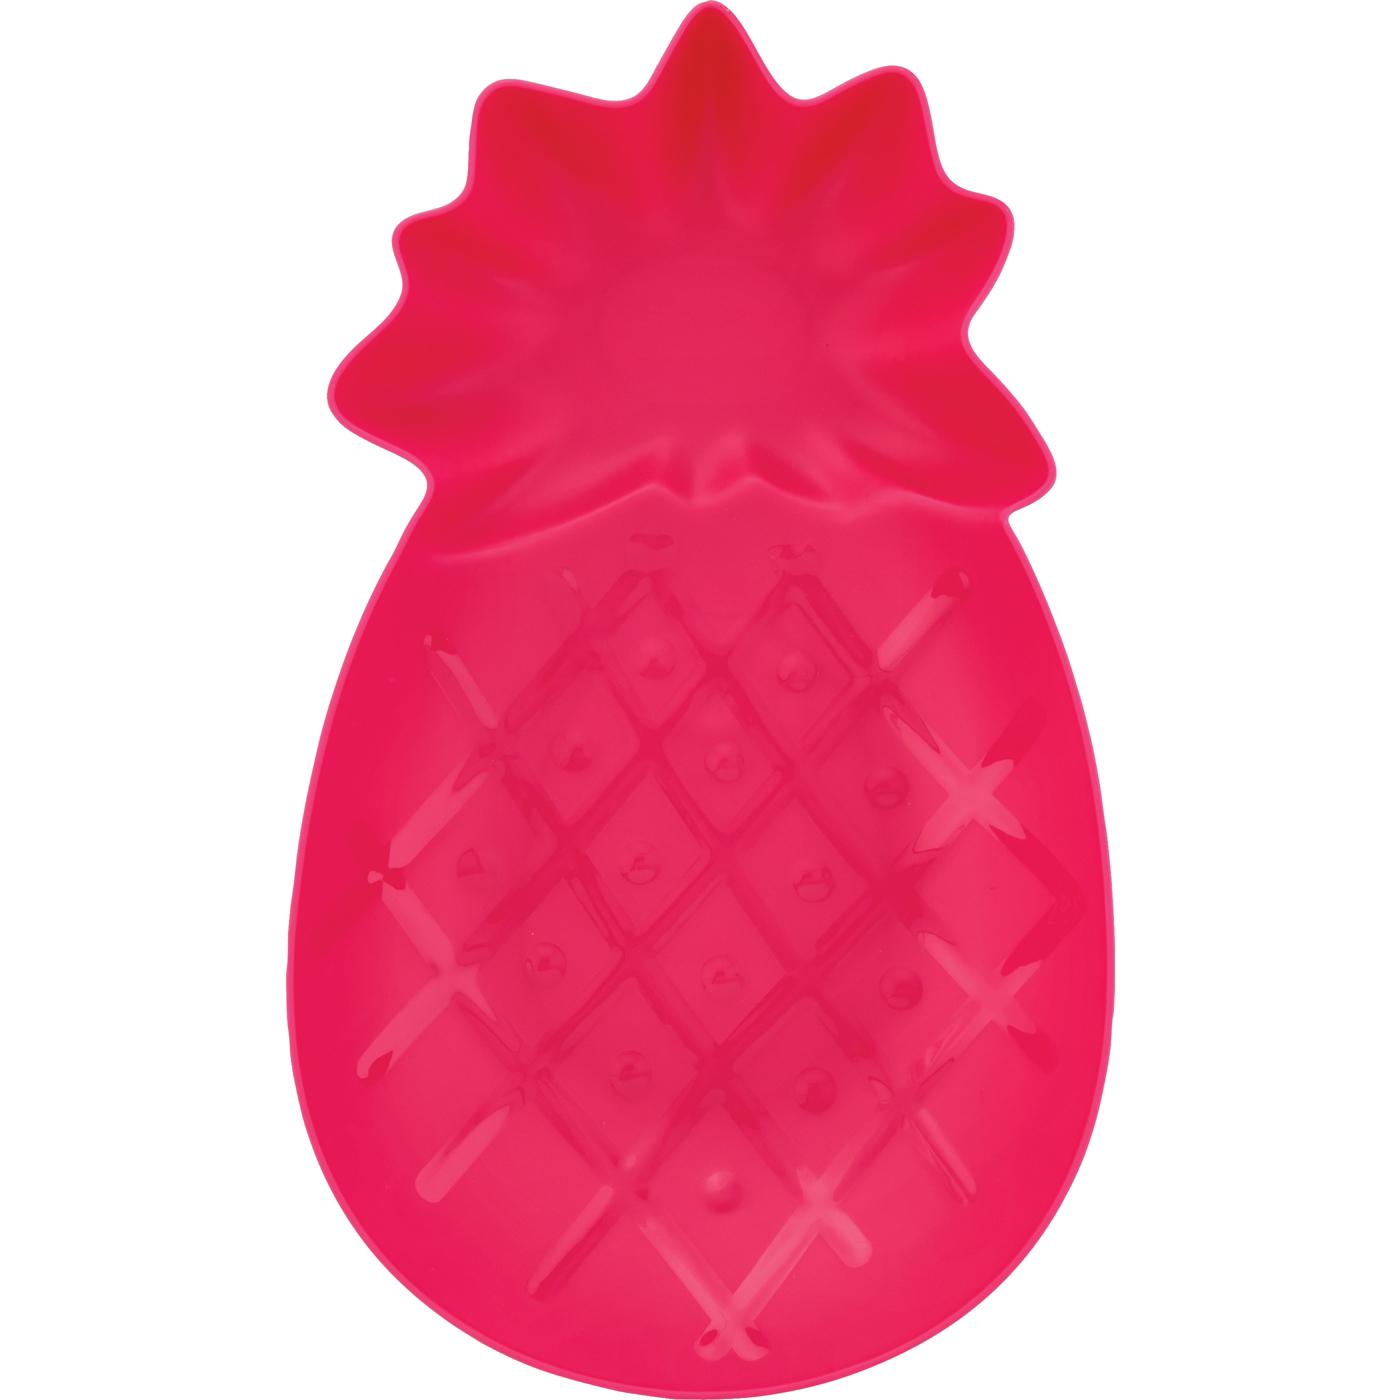 Destination Holiday Pineapple Tray - Pink; image 1 of 2